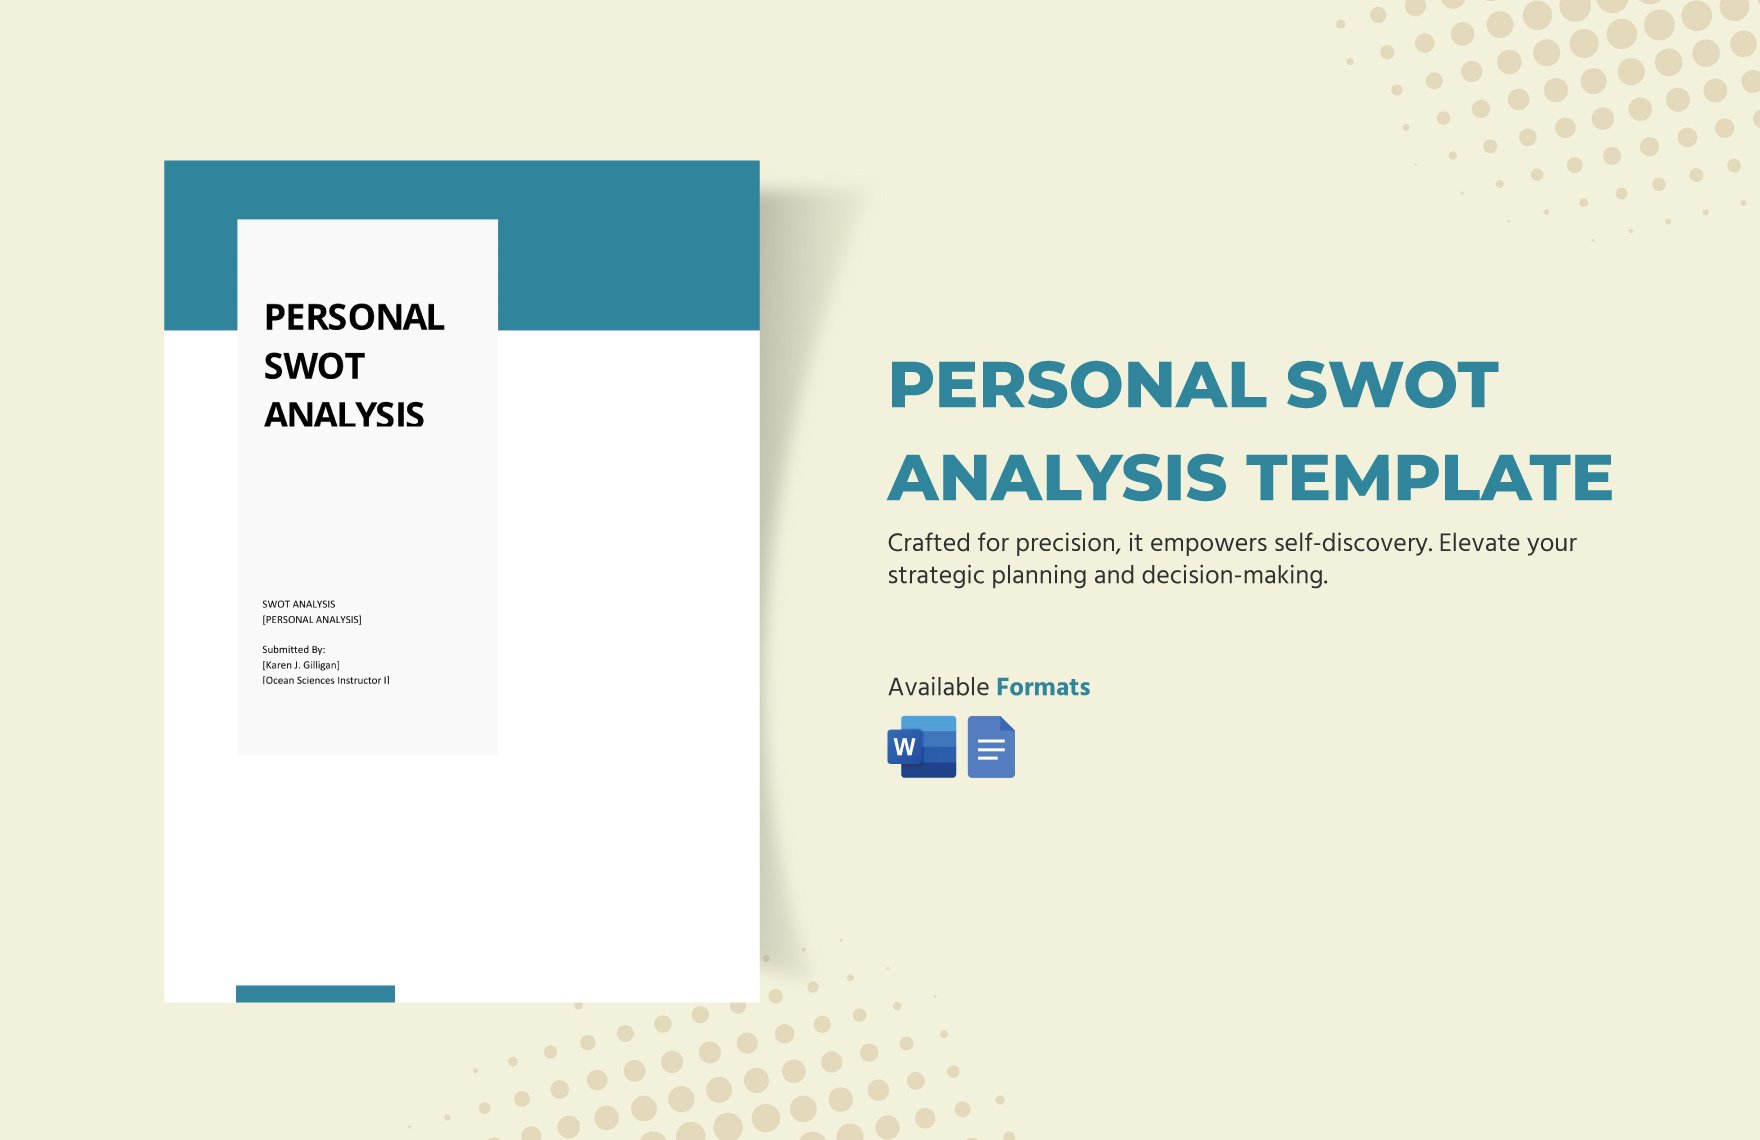 Personal Swot Analysis Template